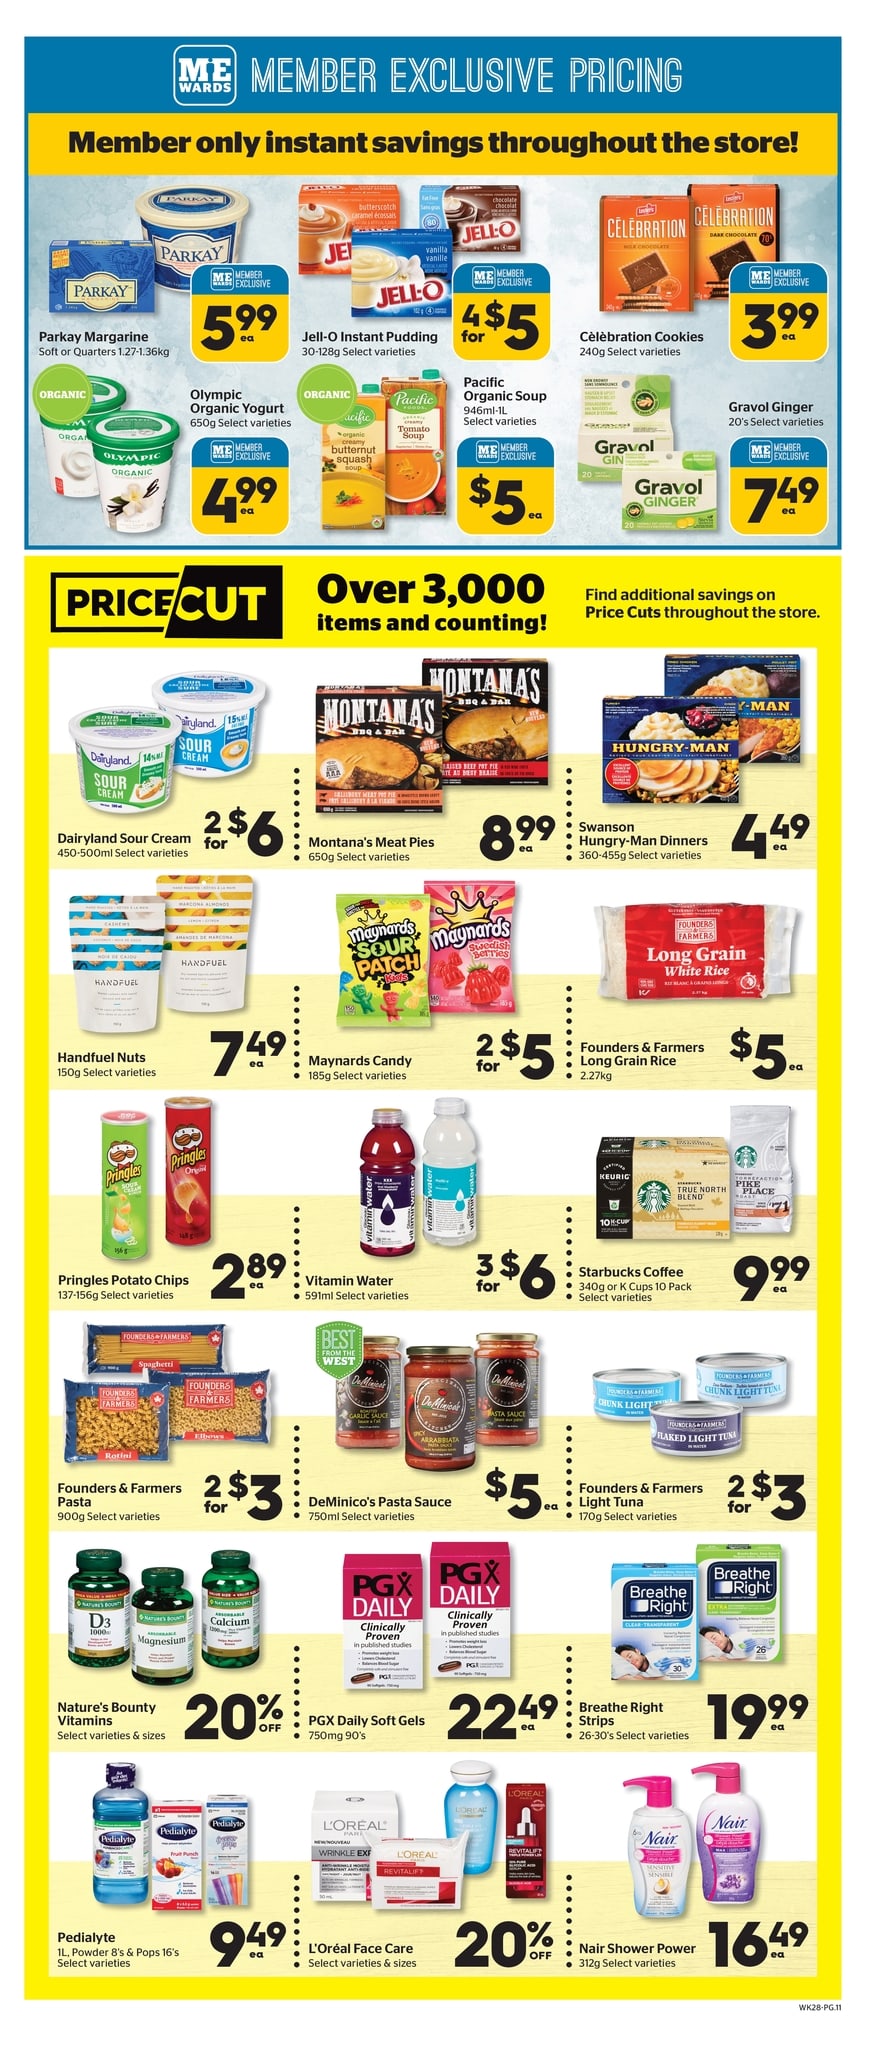 Calgary Co-op - Weekly Flyer Specials - Page 16